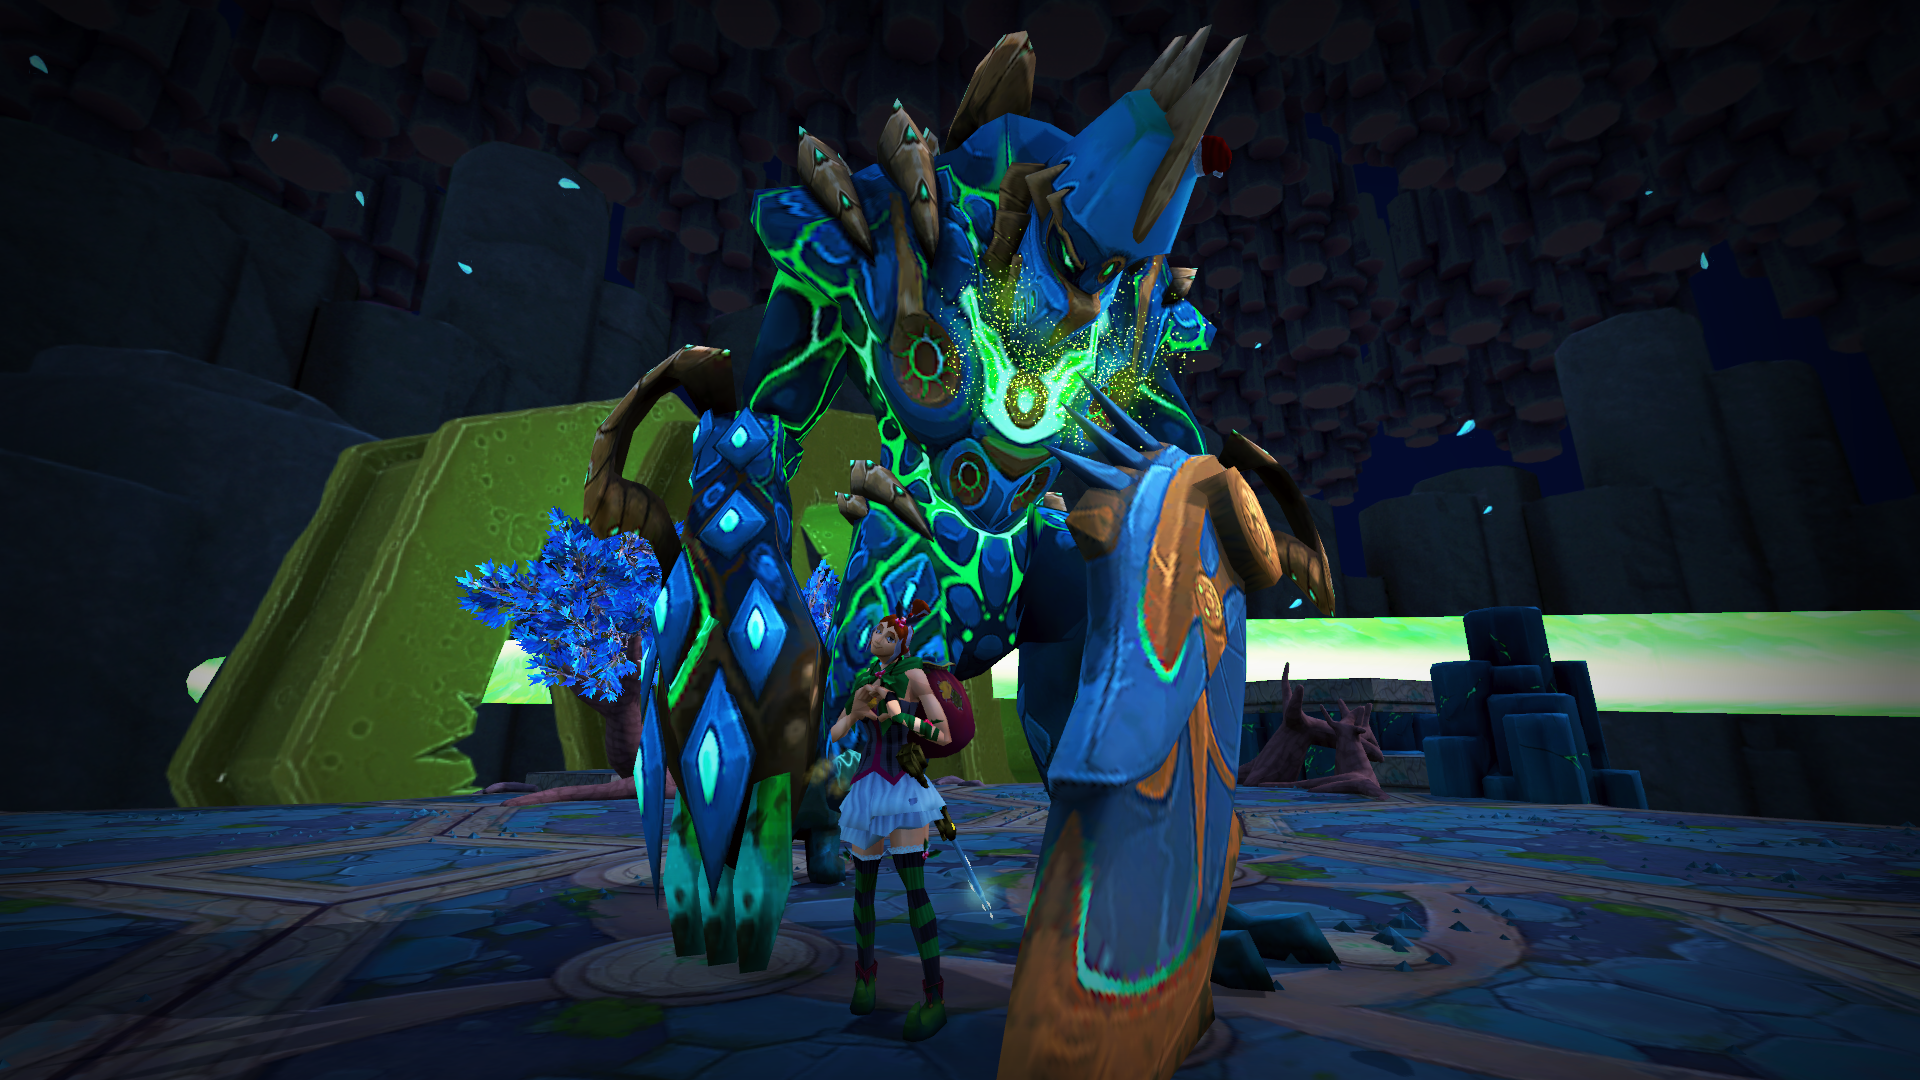 Telos Let Me Take A Picture Before Beating The Crap Out Of